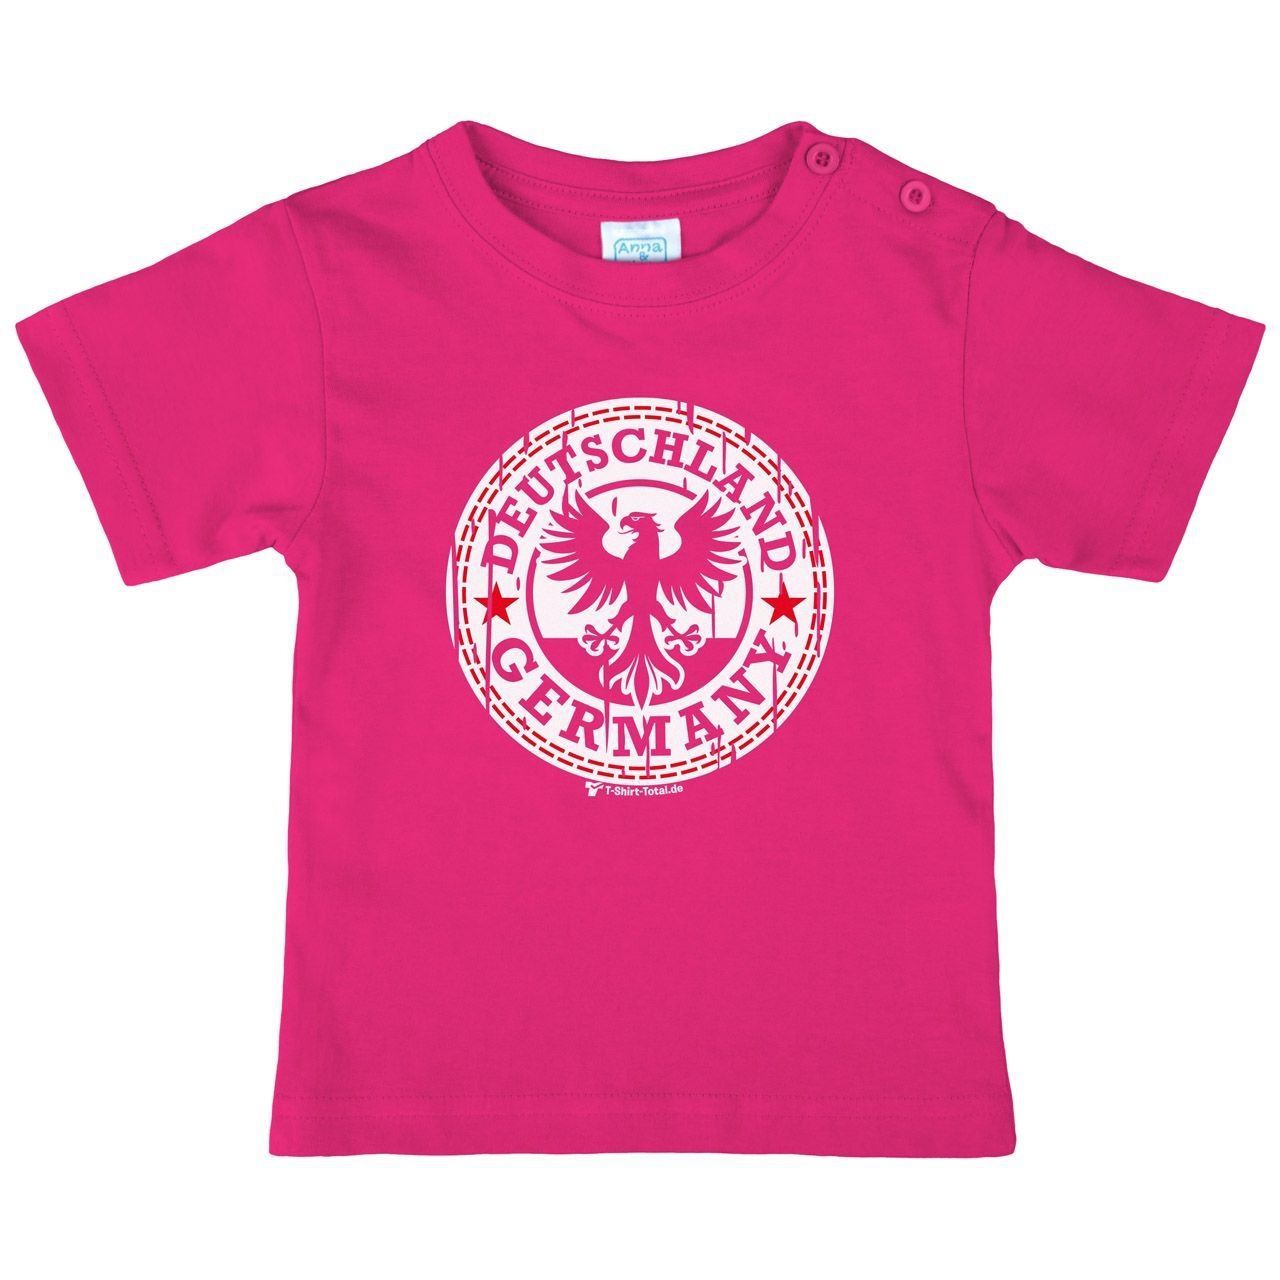 Germany Button Kinder T-Shirt pink 122 / 128